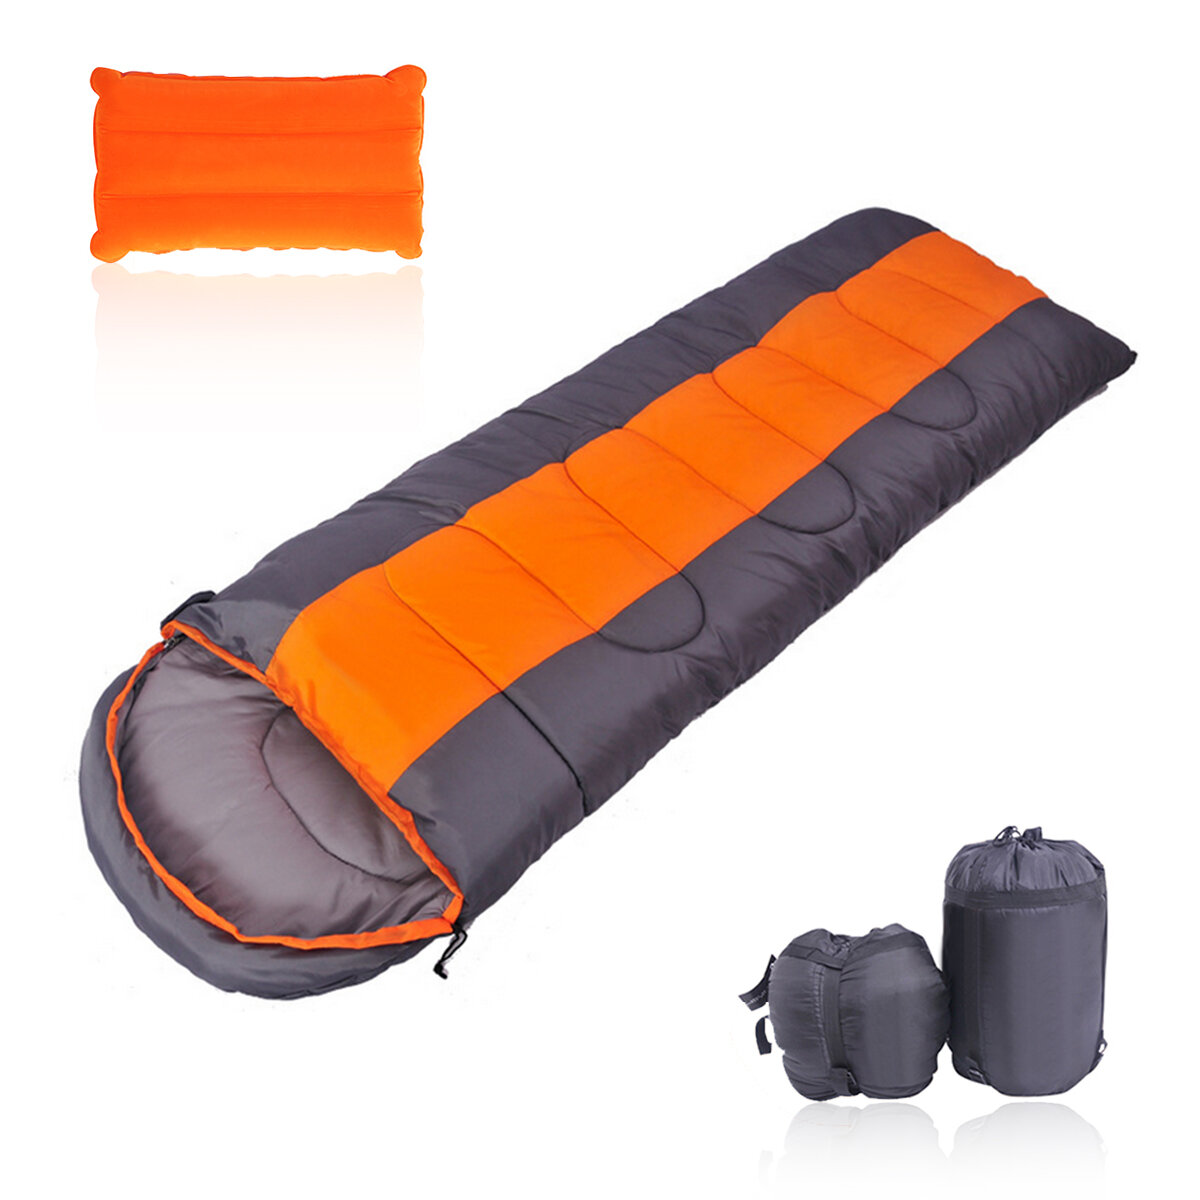 1.4KG Thicken 210T Waterproof Sleeping Bag With Pillow Portable Lightweight Outdoor Camping Hiking Sleeg Bag Outdoor Bedding For Single People